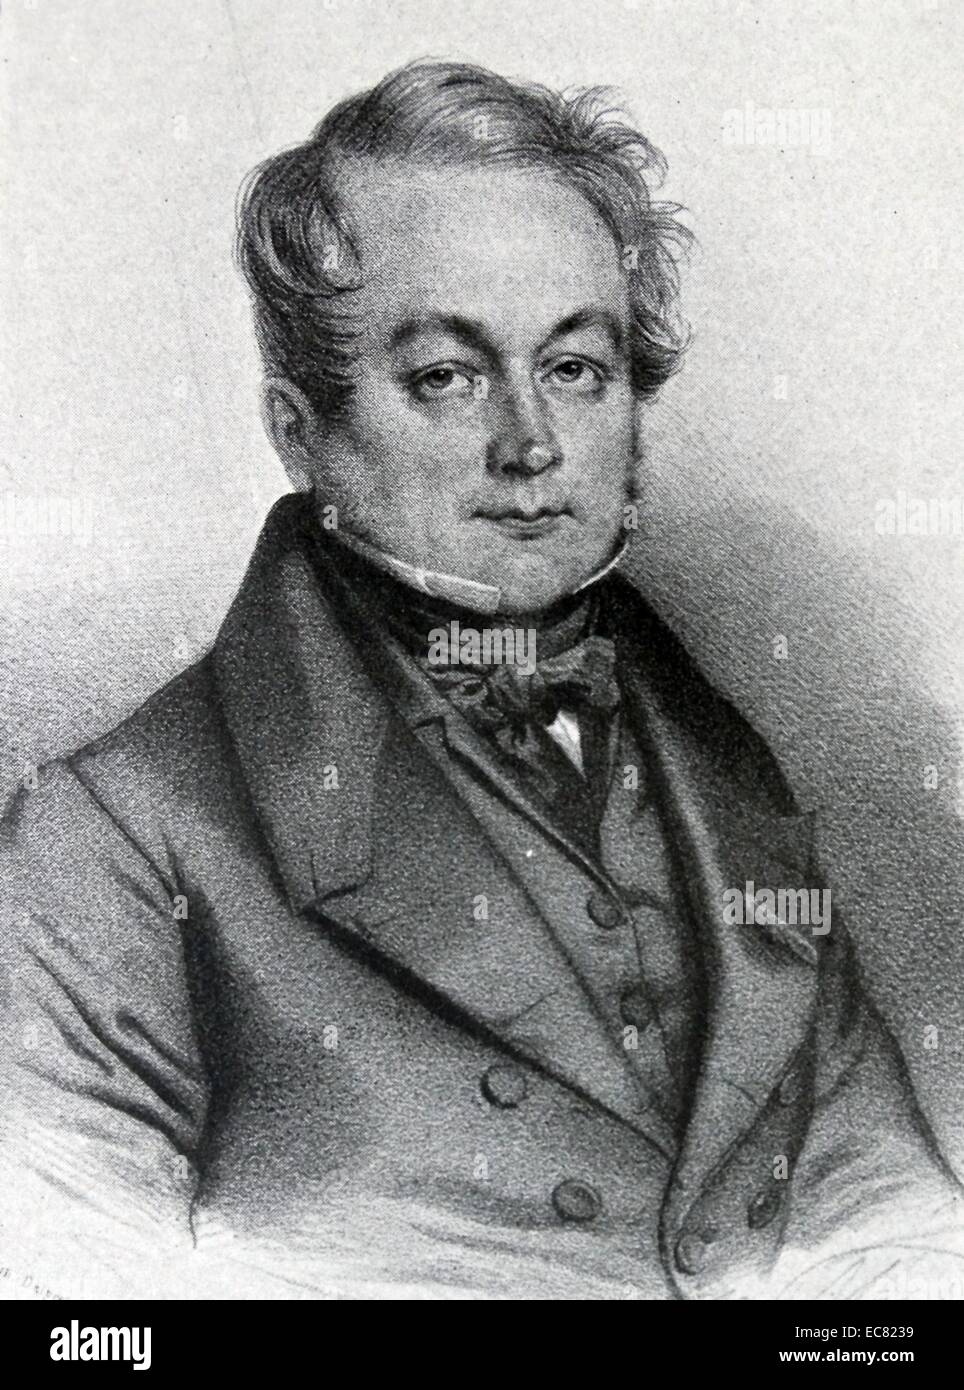 François Magendie (6 October 1783 – 7 October 1855) was a French physiologist. Best known for his analysis of the foramen of magendie. Stock Photo